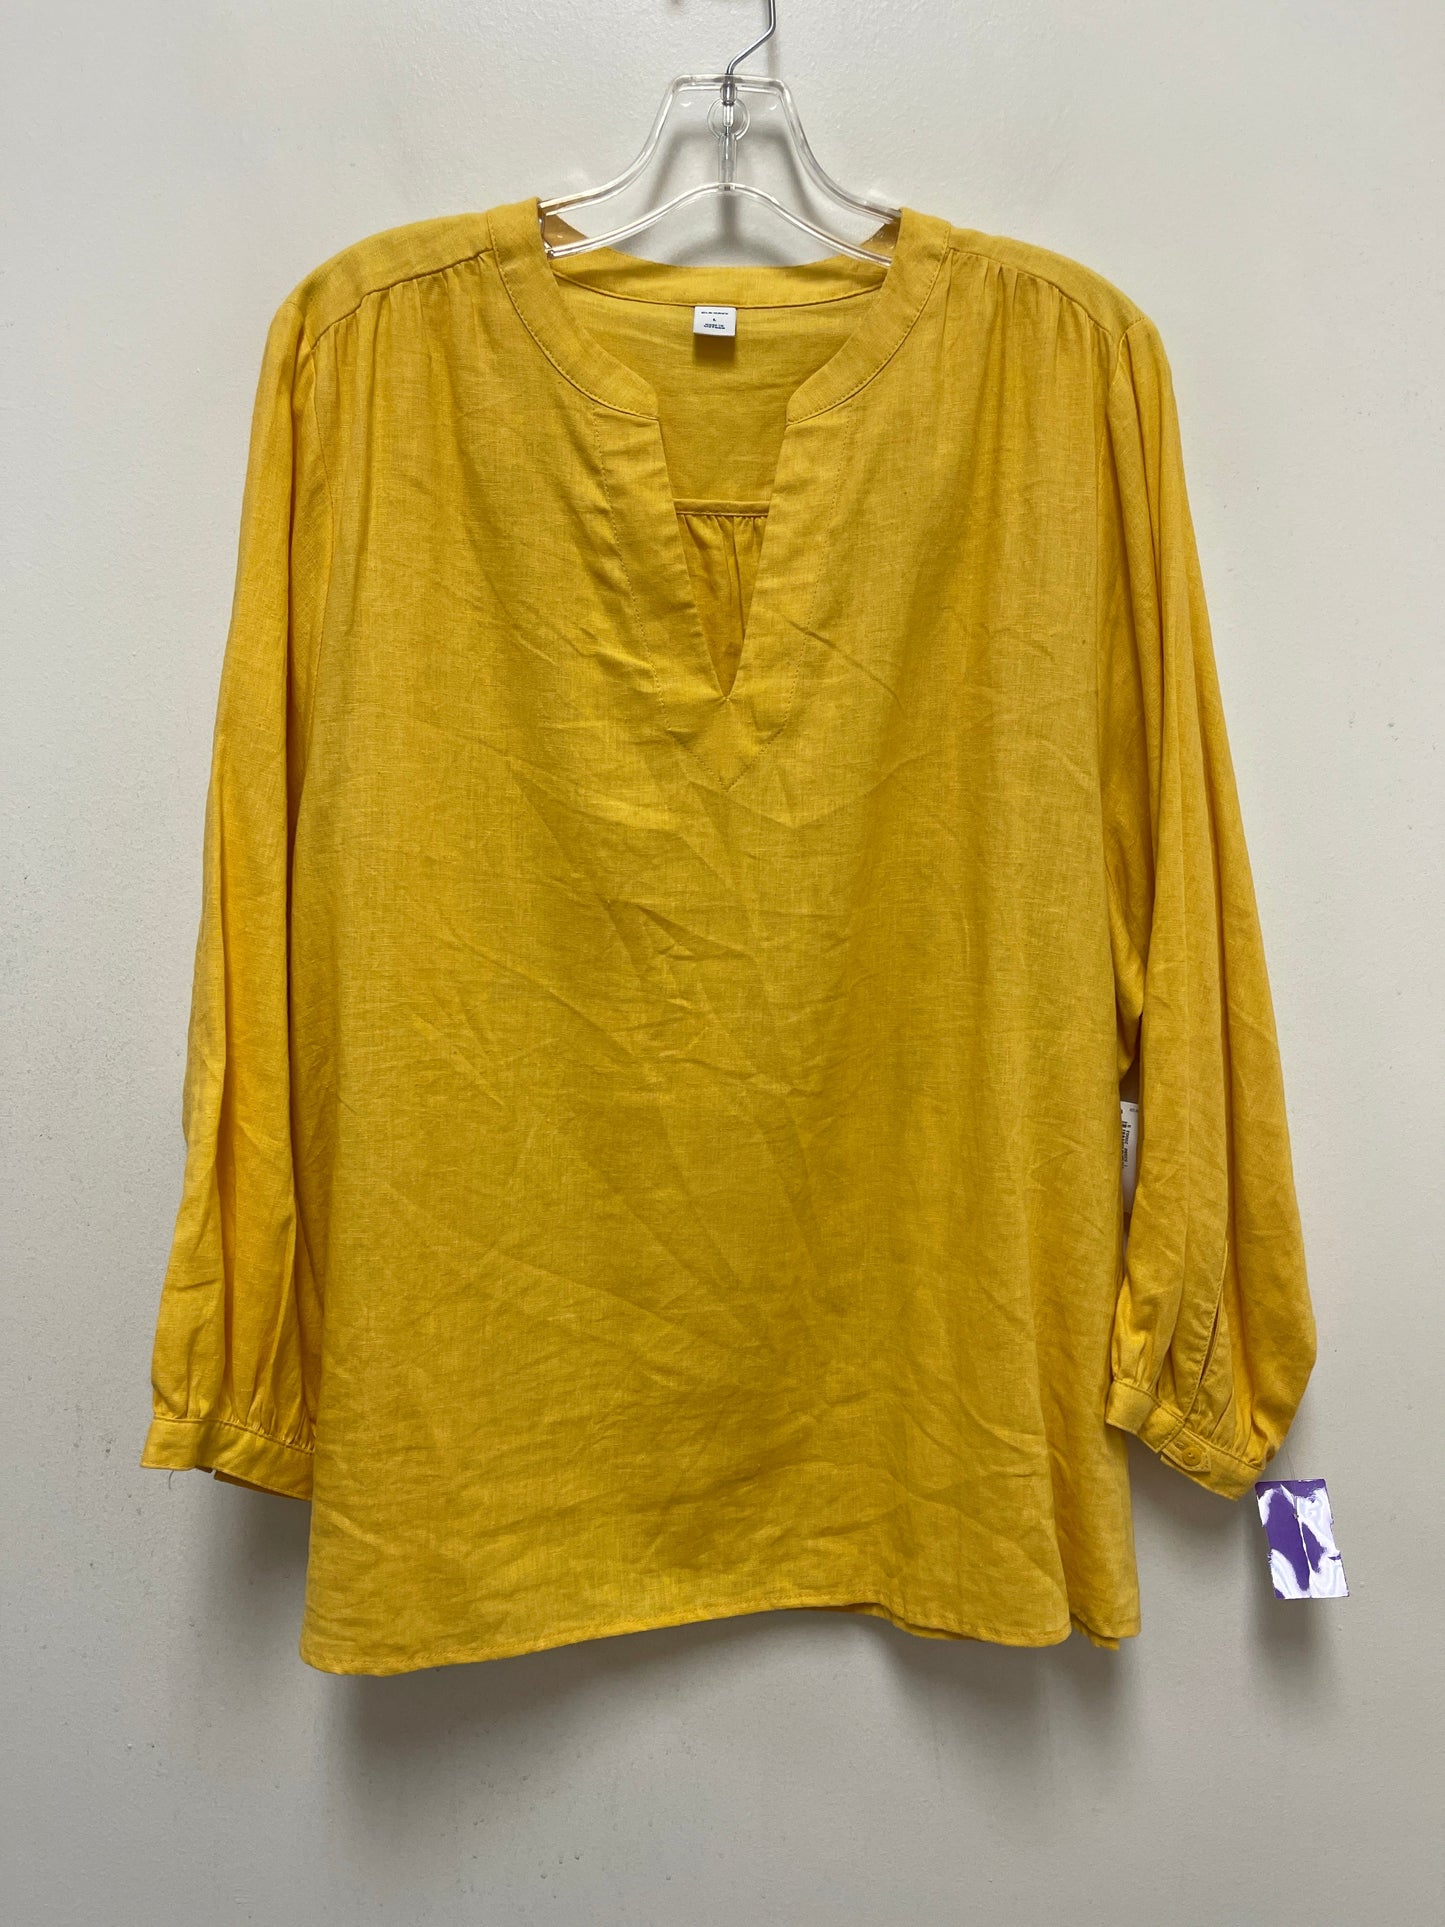 Yellow Top Long Sleeve Old Navy, Size L